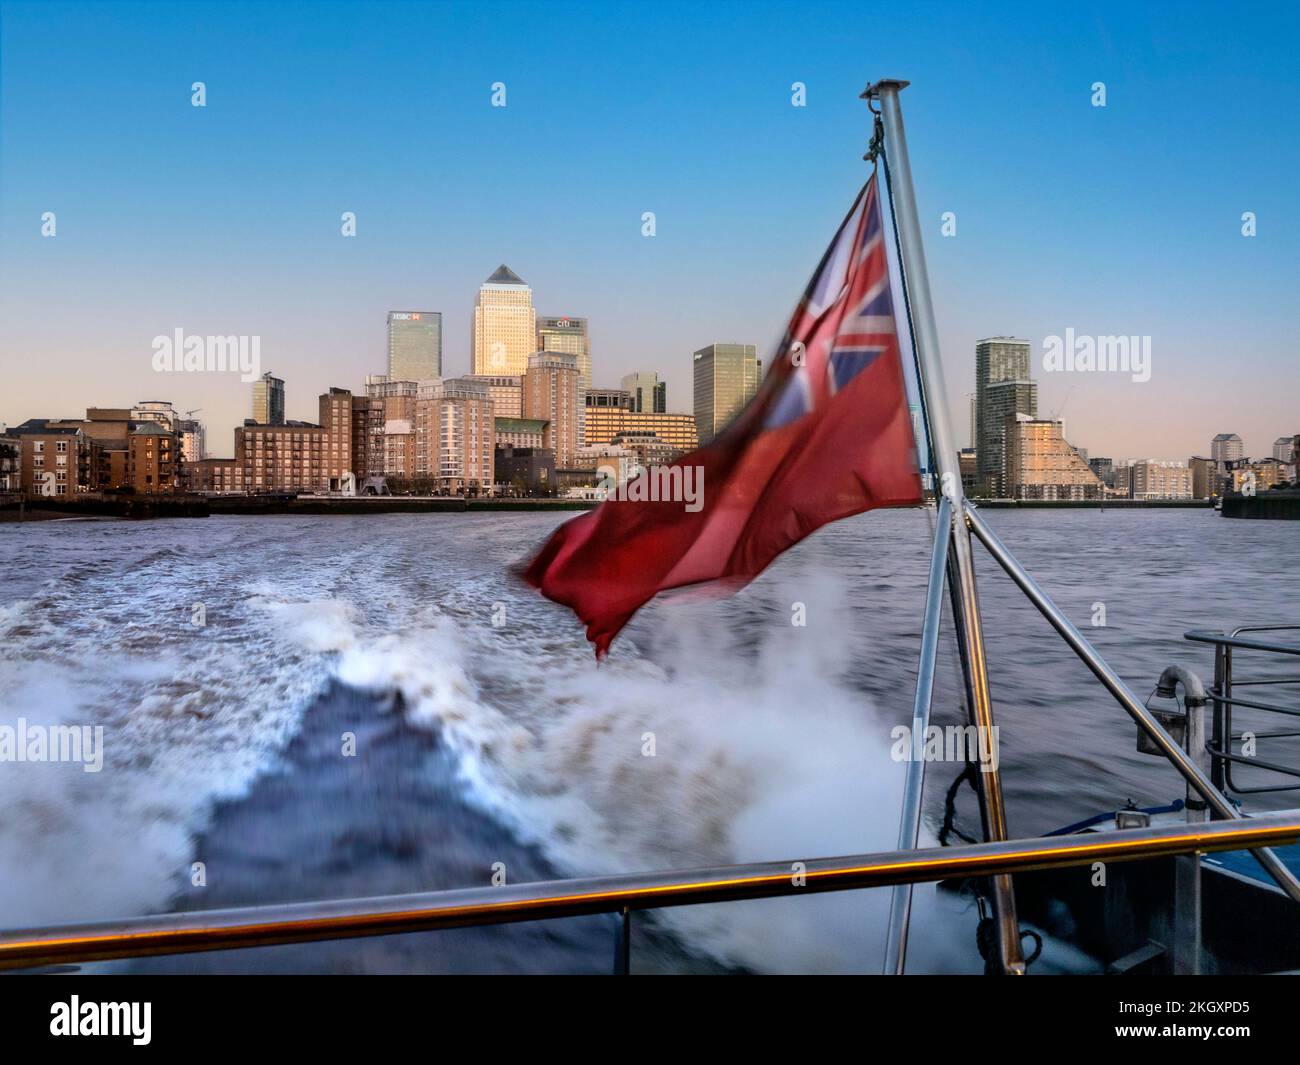 CANARY WHARF Thames Clipper River boat RB1 blur blurred at speed, flying traditional red ensign flag departing Canary Wharf at sunset River Thames London UK Stock Photo